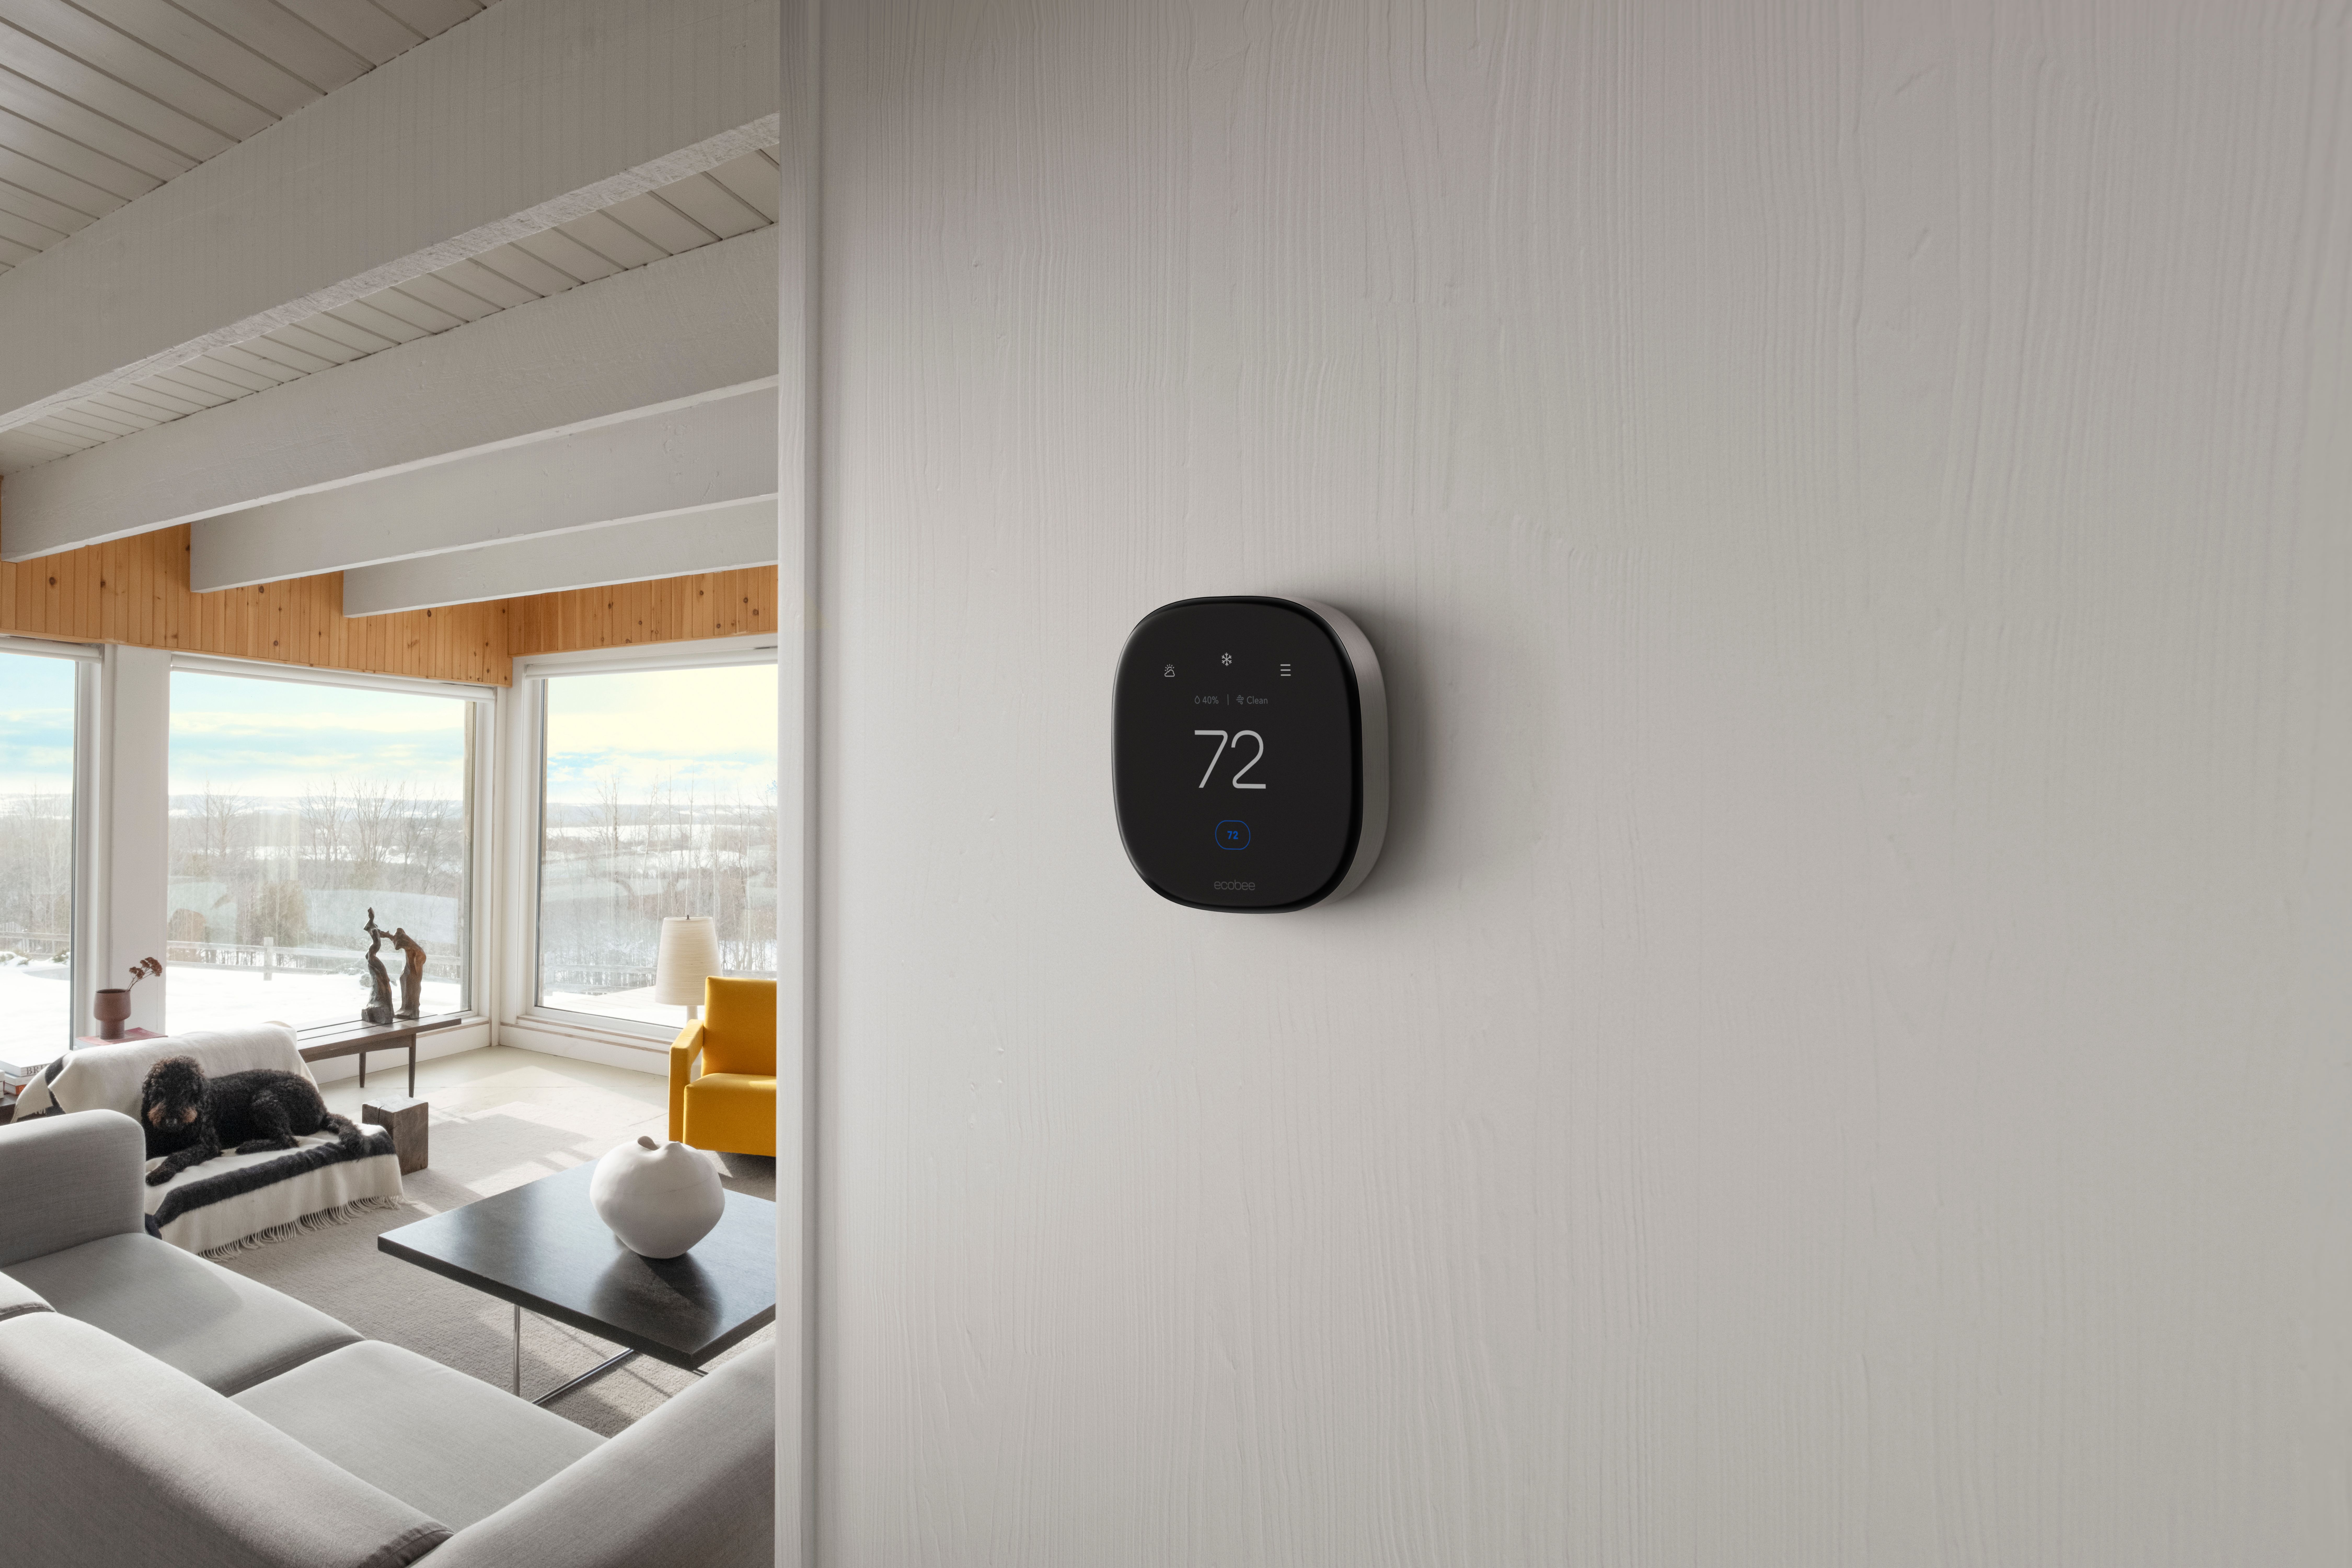 ecobee Smart Thermostat Premium installed in a living room setting